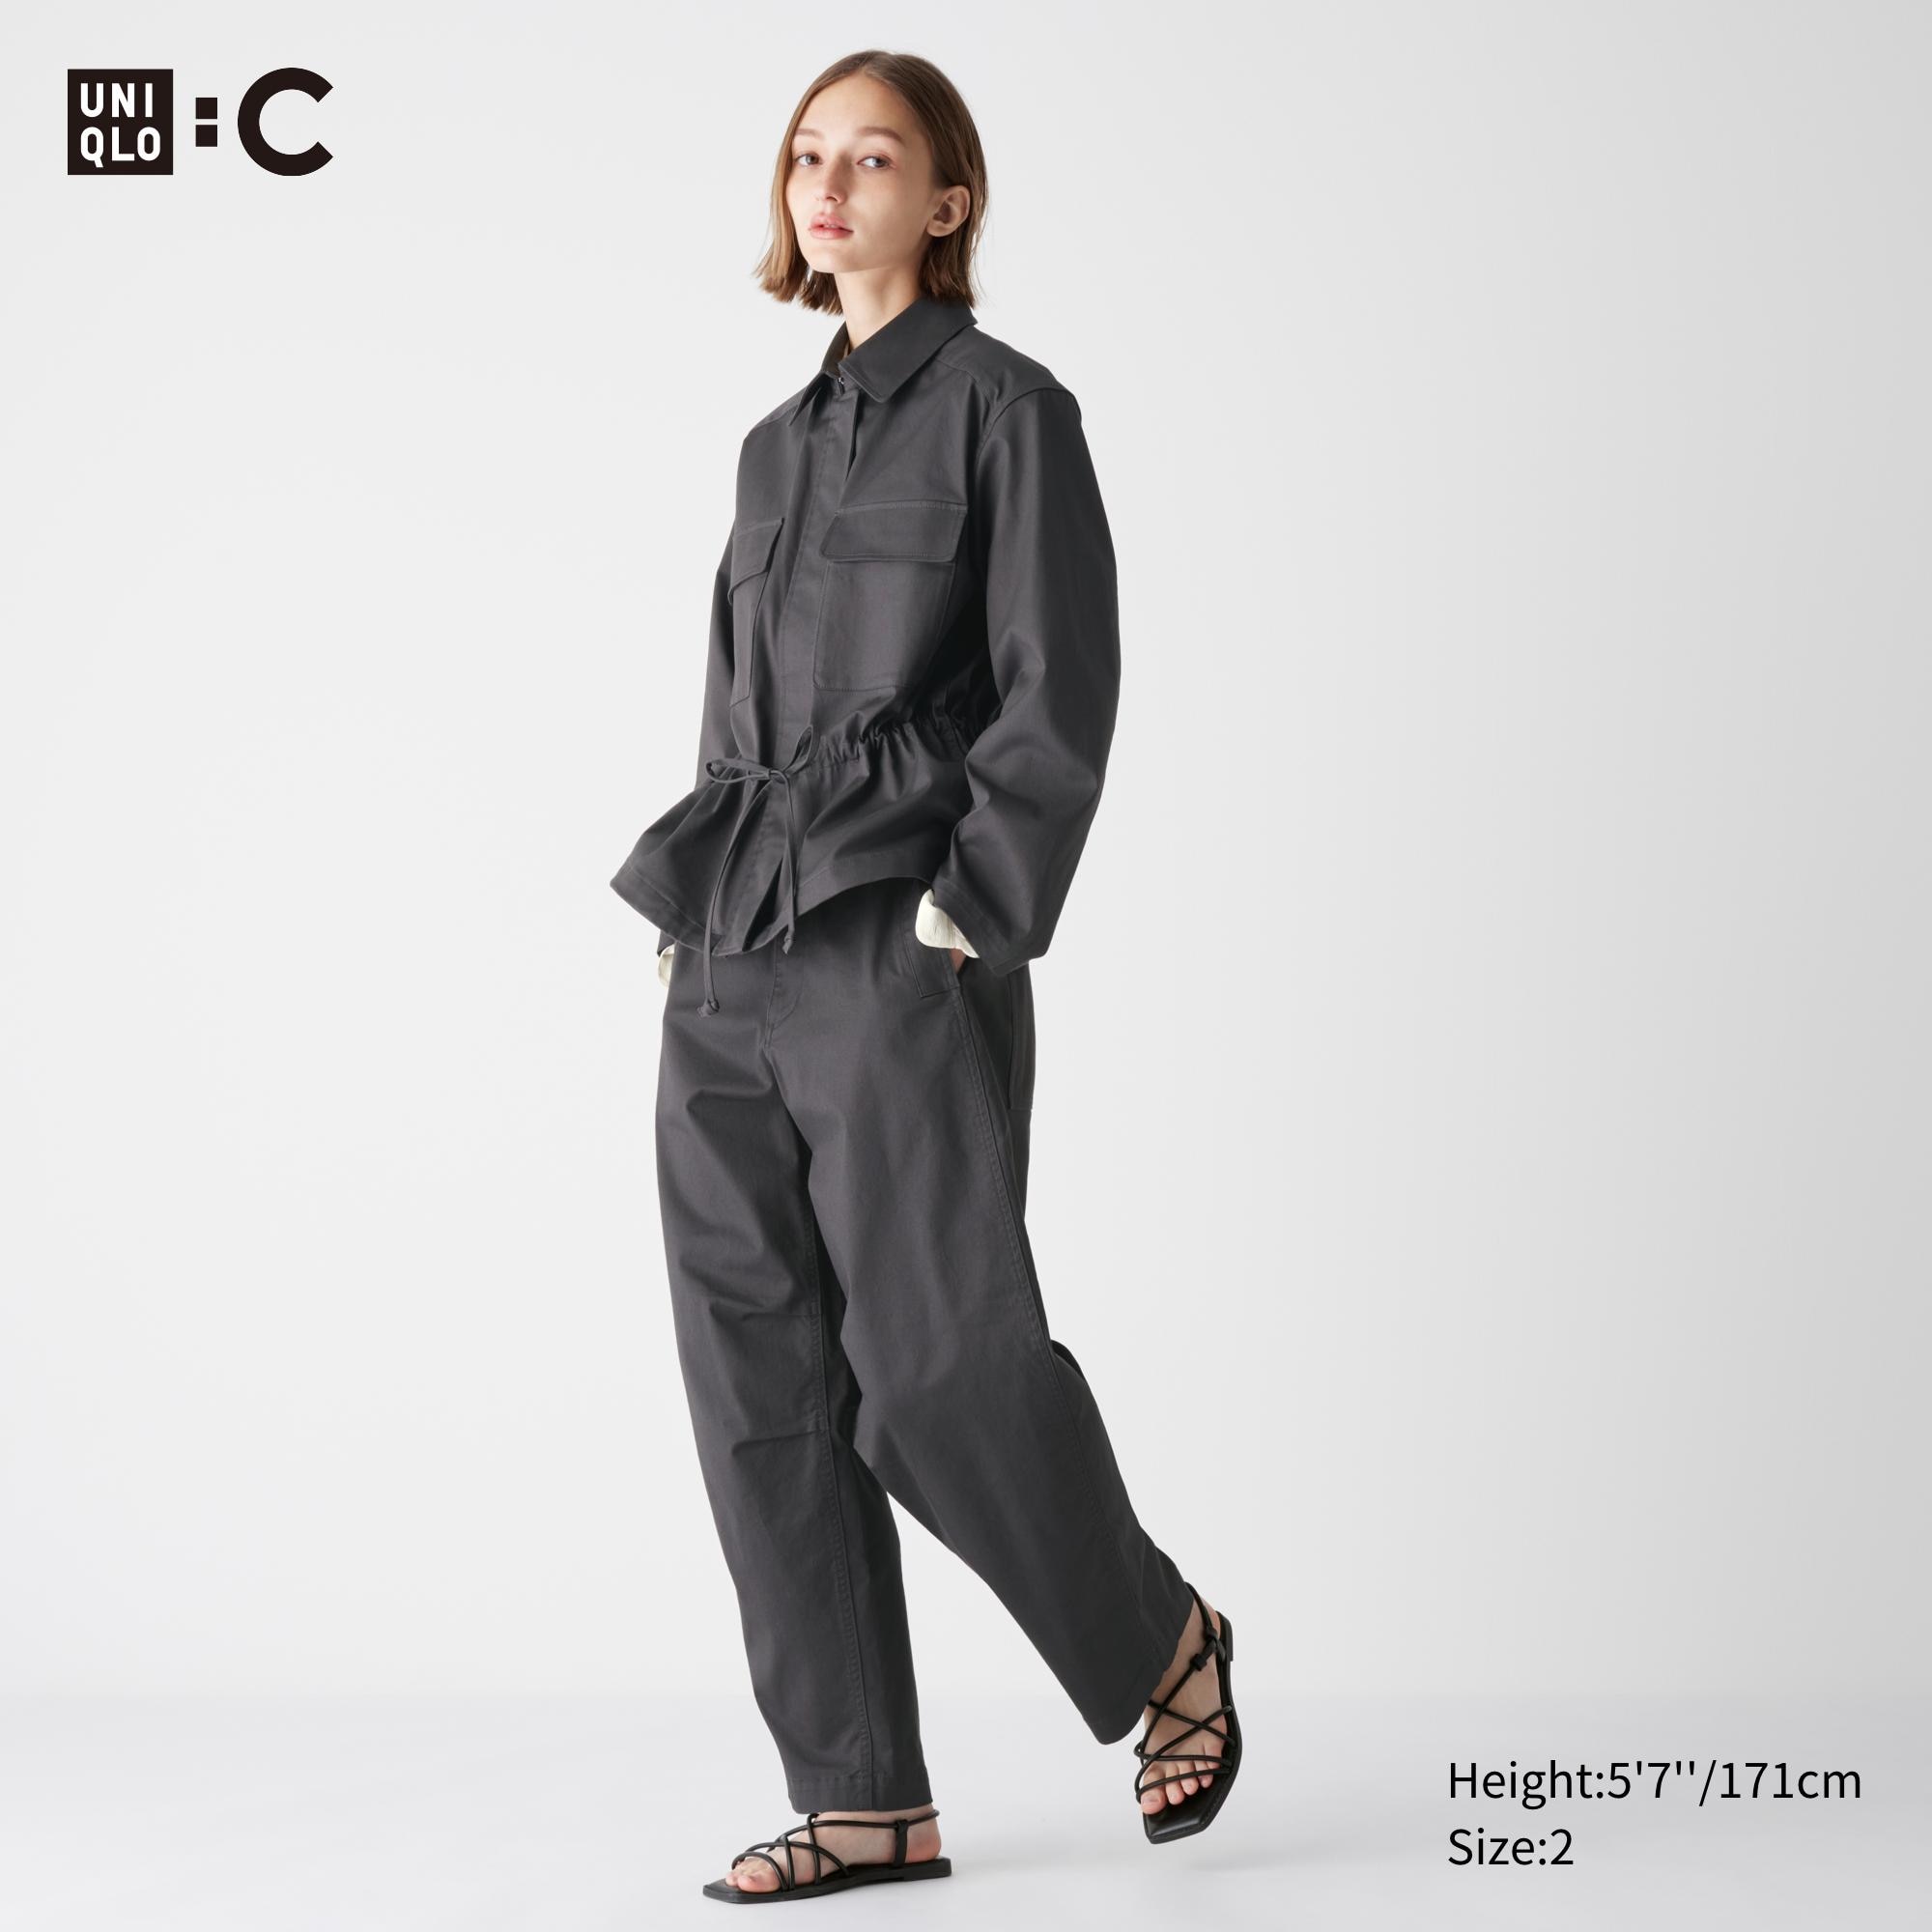 Sites-GB-Site  Fit n flare dress, Uniqlo, Wide pants